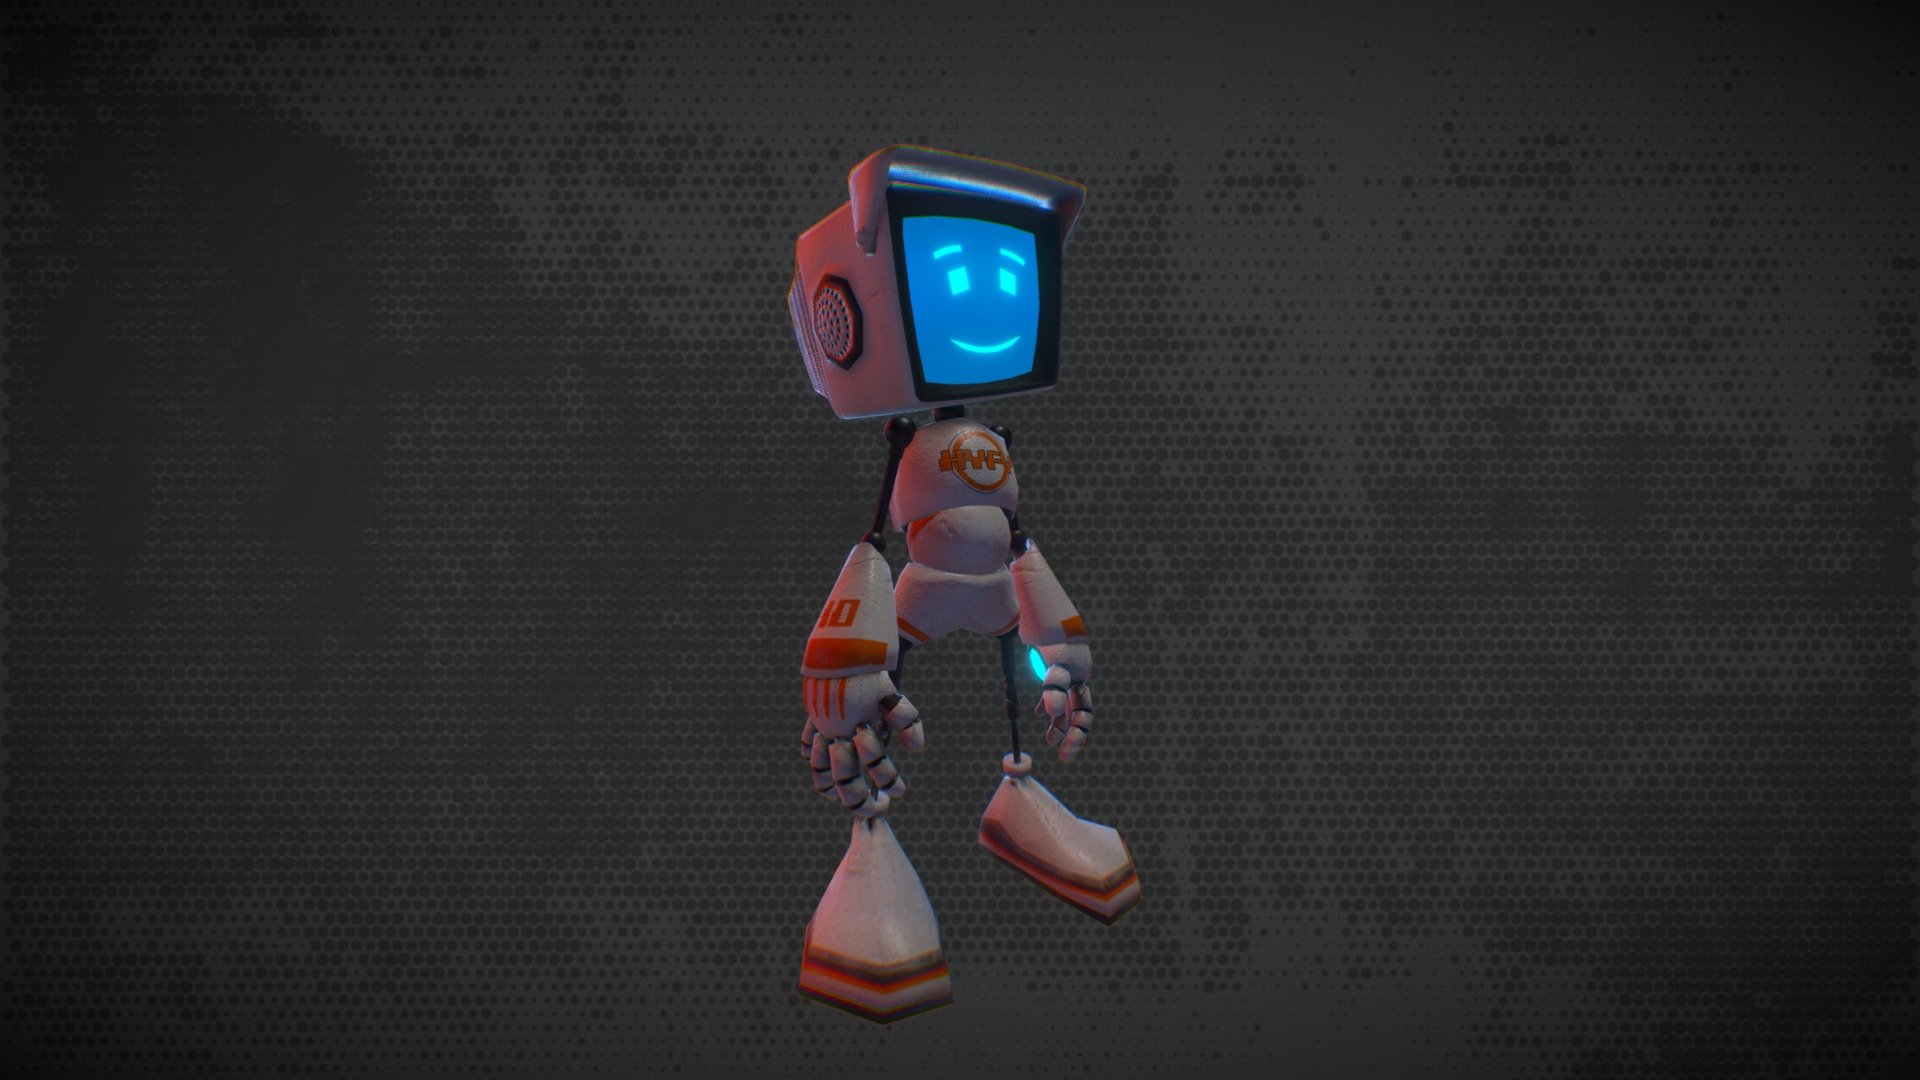 Robot created as an avatar for Second Life - LokiBot - 3D model by lokieliot 3d model